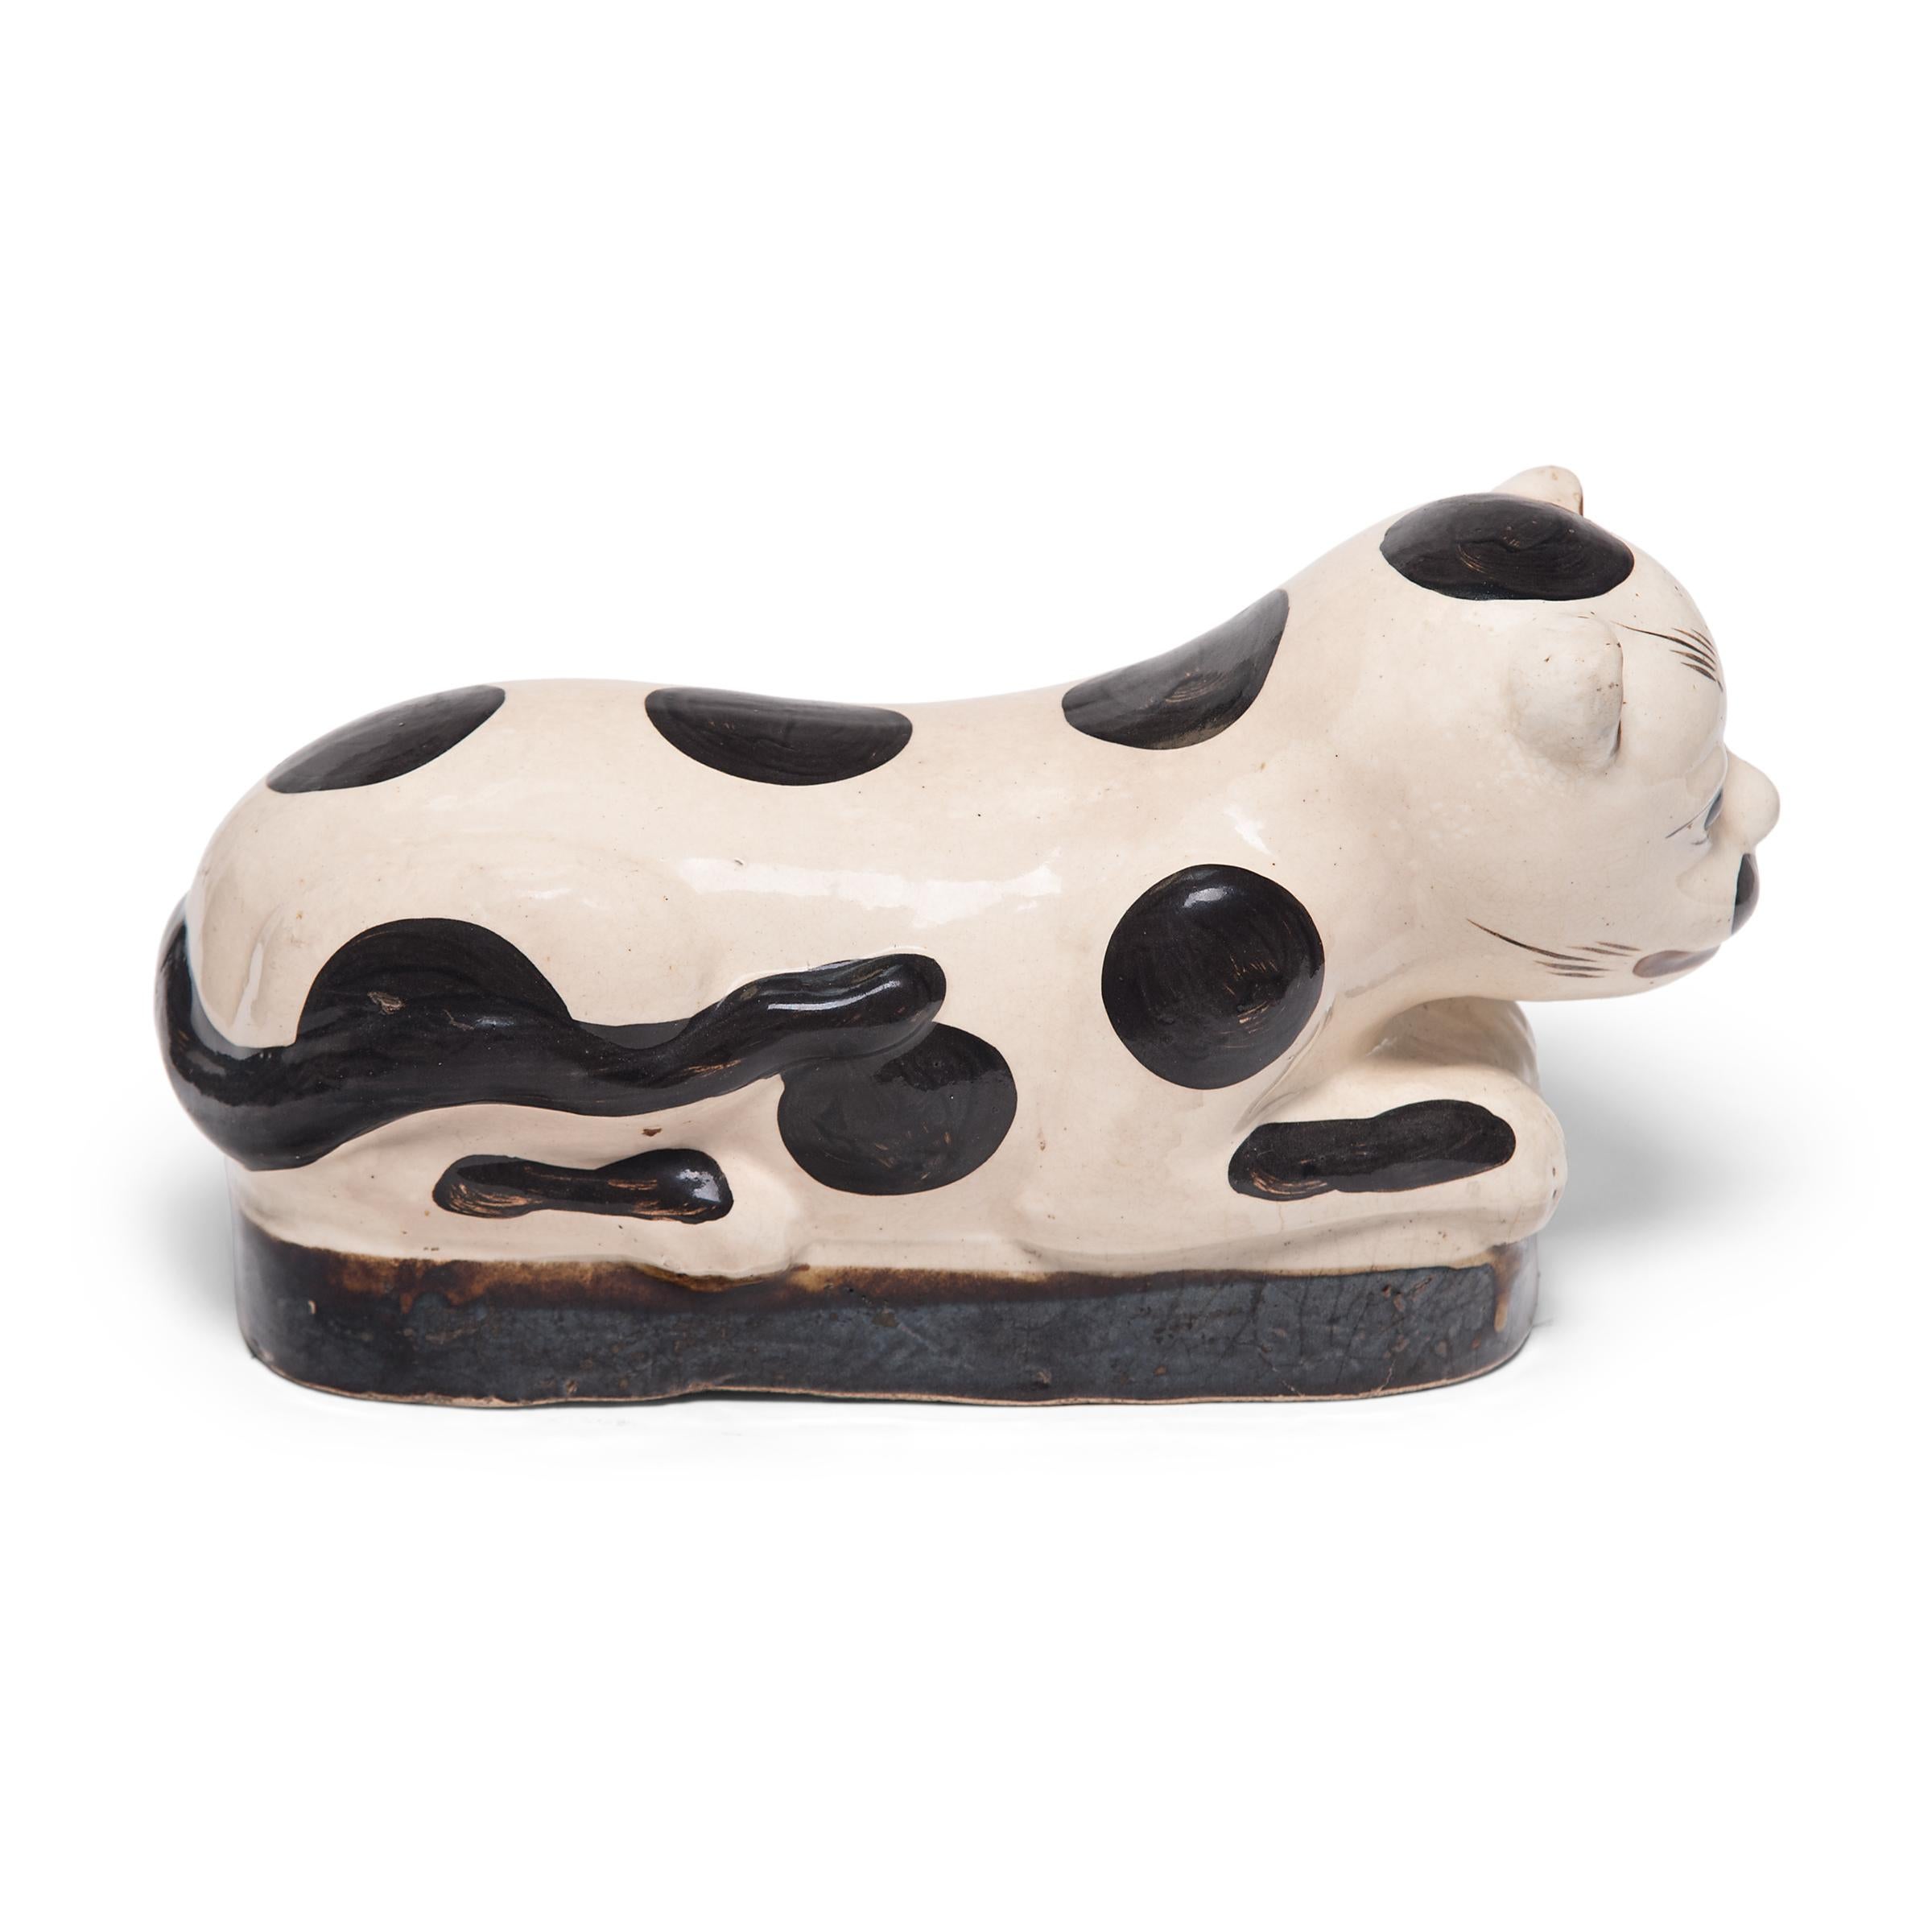 To keep her elaborate hairstyle intact while sleeping, a well-to-do Qing-dynasty woman once used this ceramic headrest as a pillow. The headrest is shaped as a crouching house cat, with whiskers and fur playfully painted in with black, brown, and